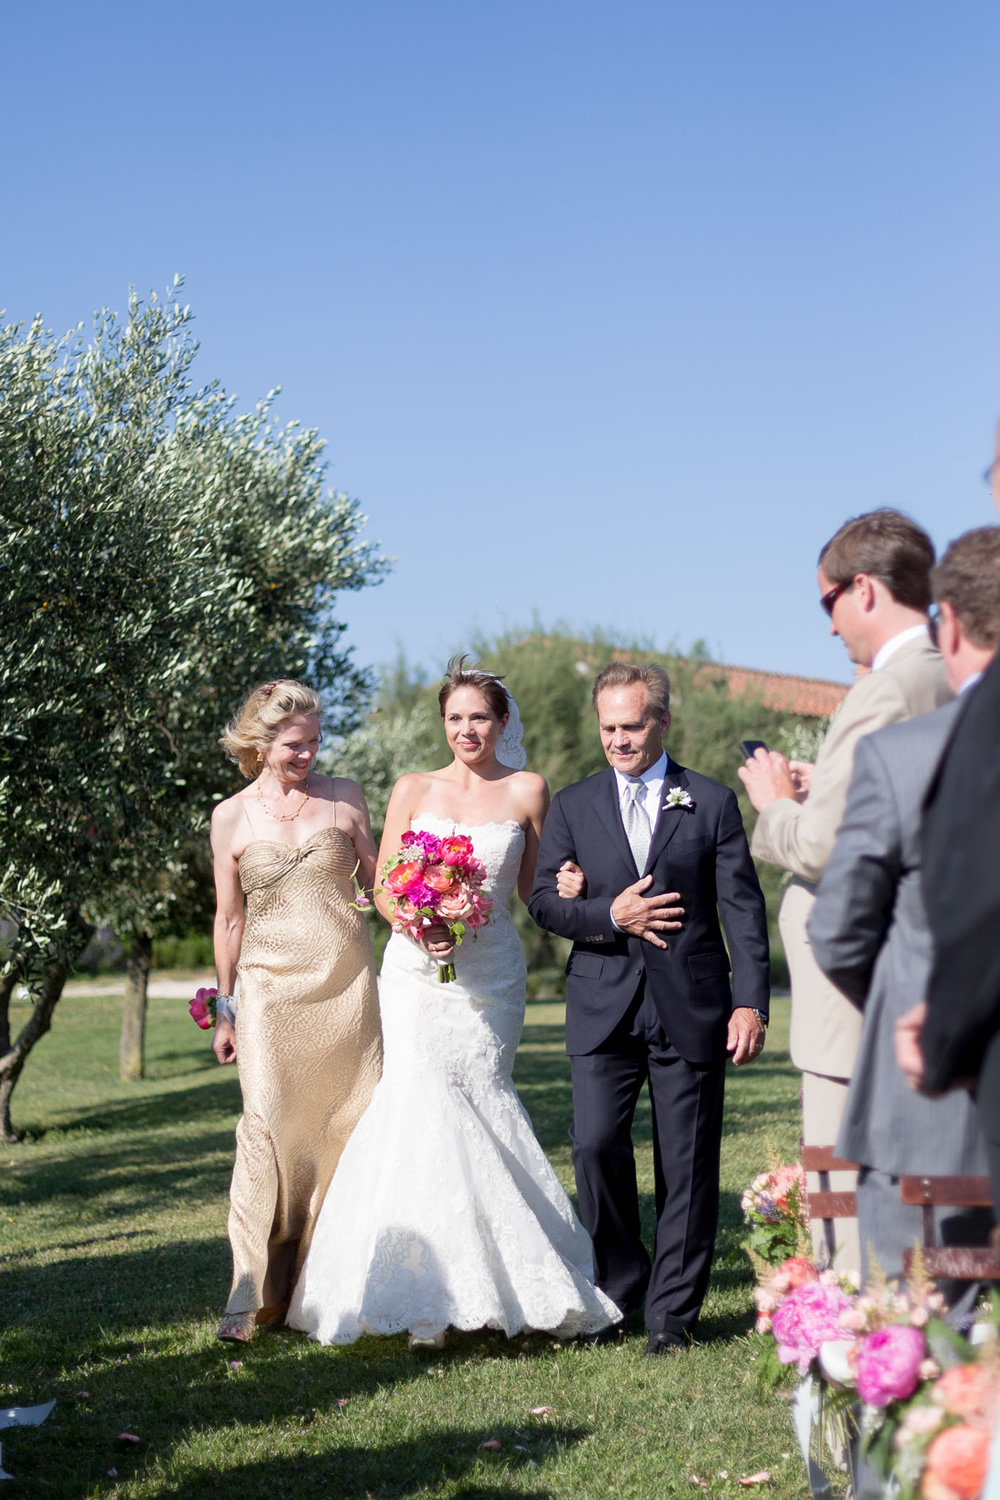 Getting married in Val d'Orcia